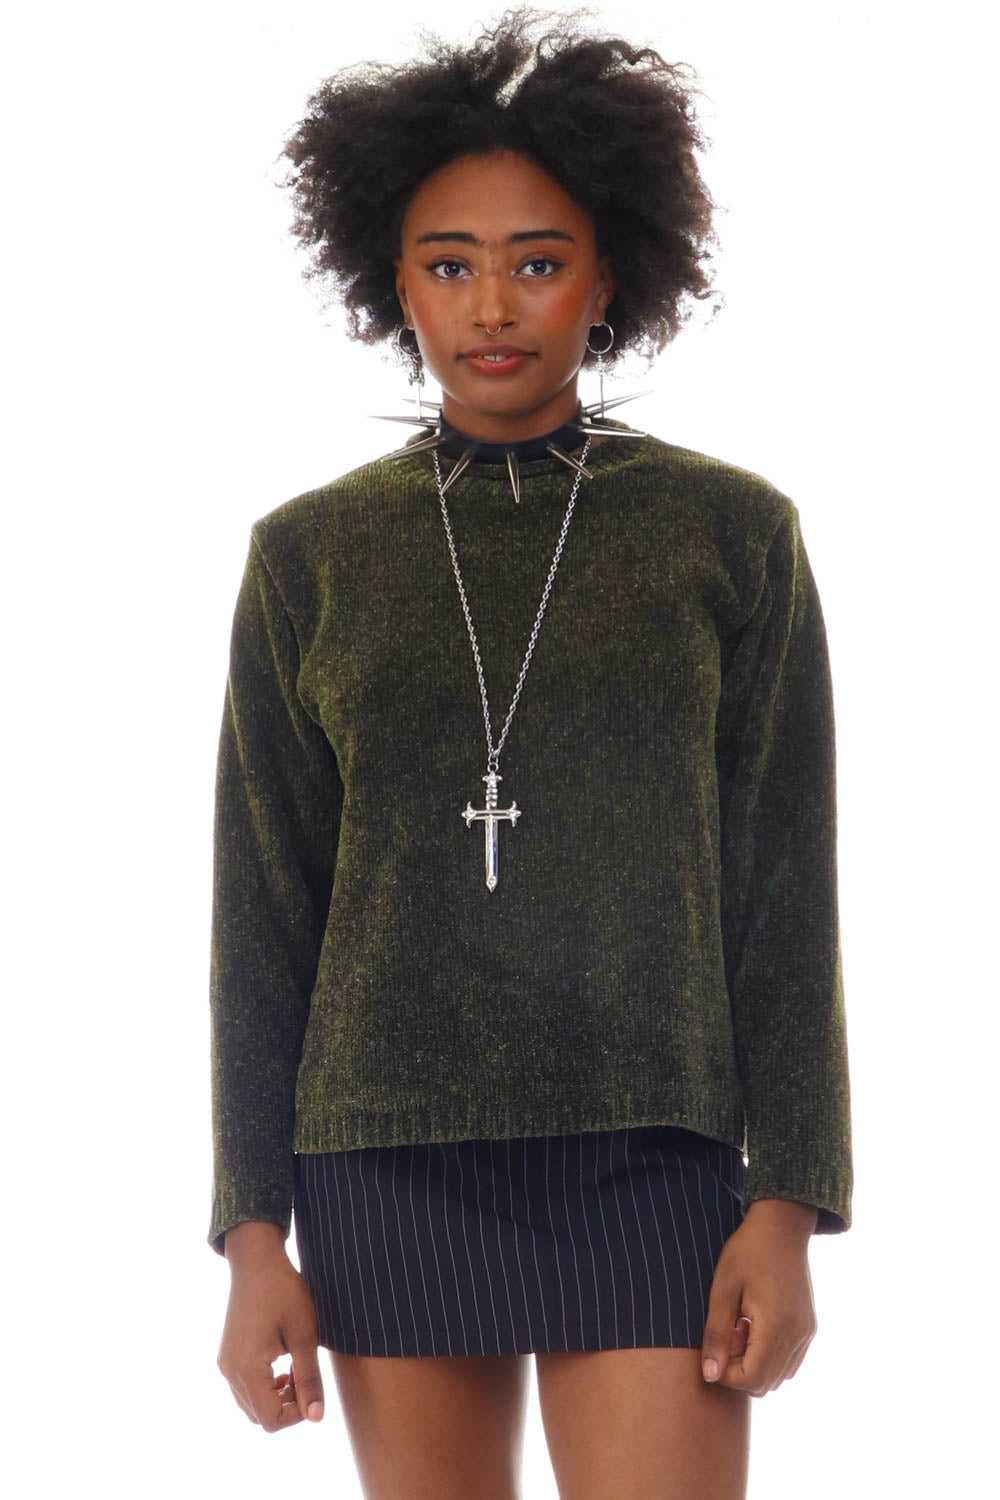 Vintage 90's Fuzzy Green Sweater - S/M - image 1